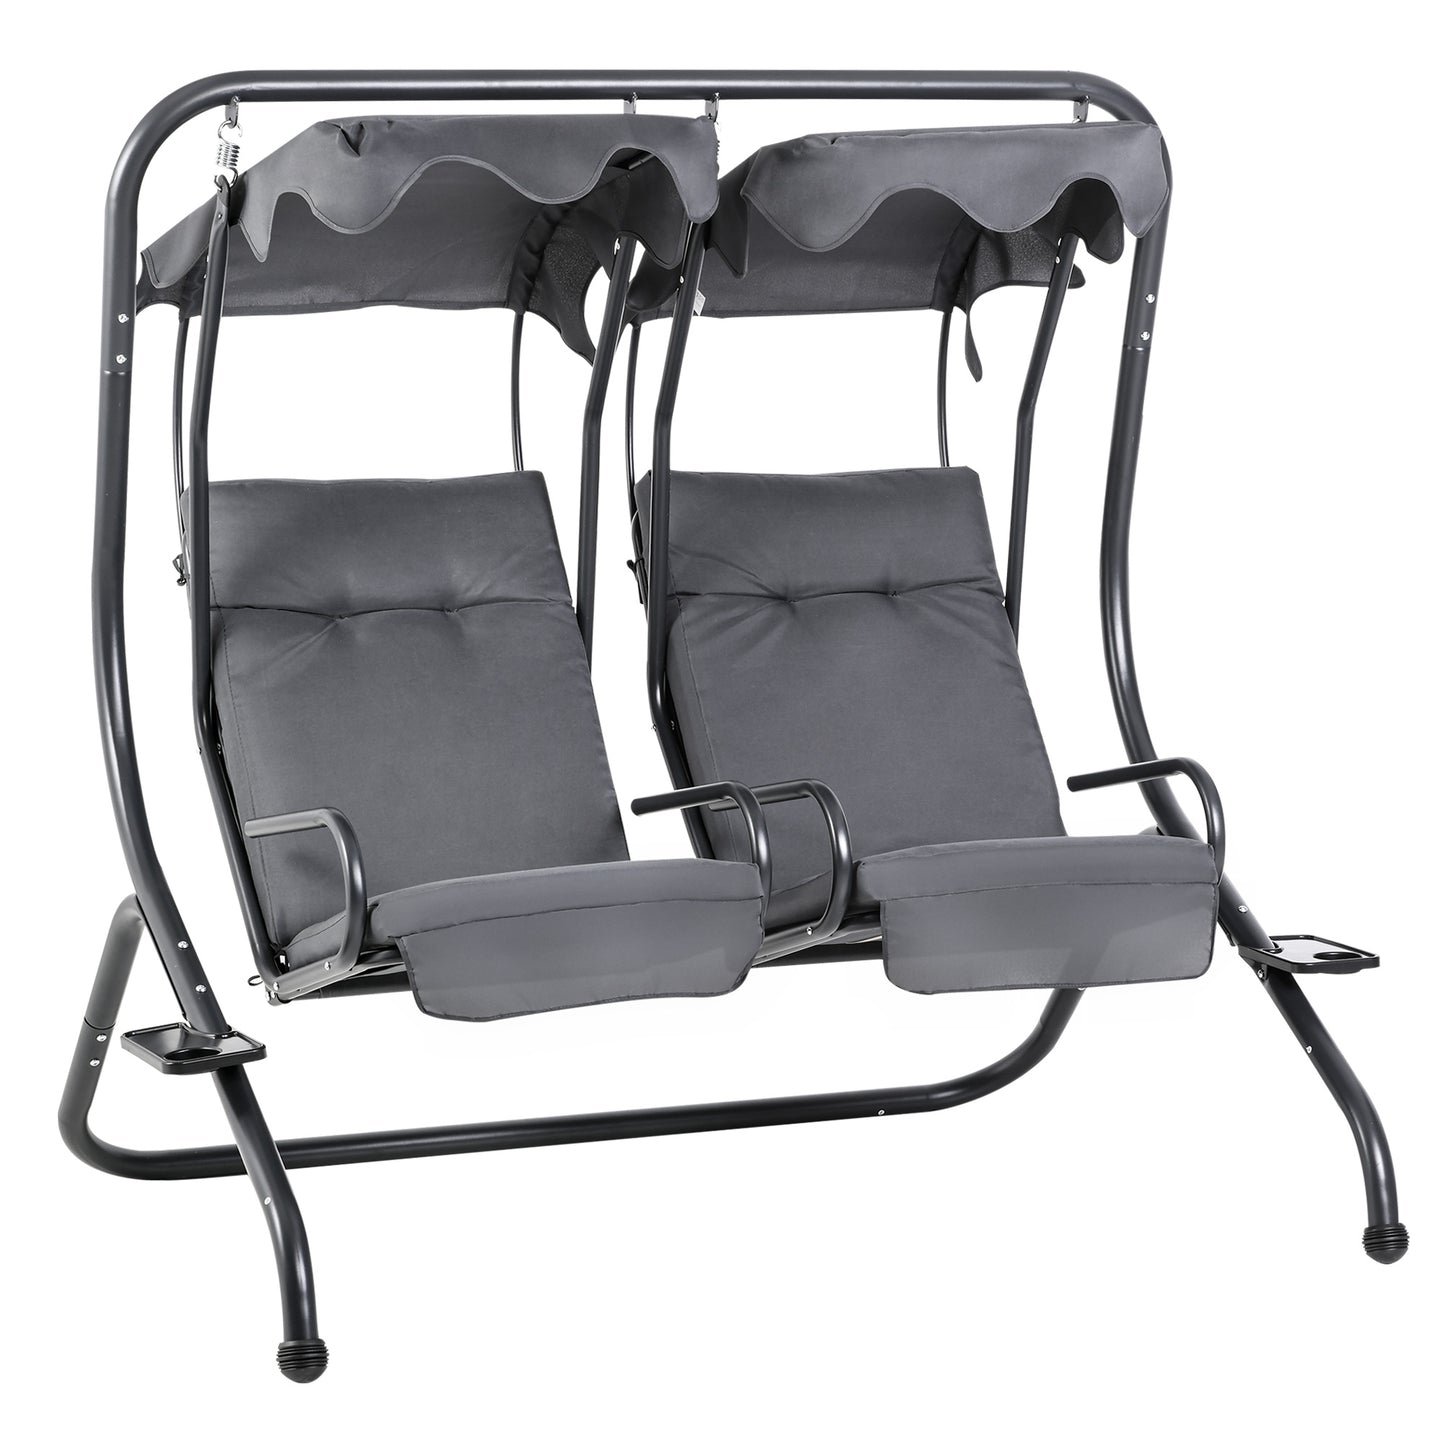 Outsunny Canopy Swing 2 Separate Relax Chairs w/ Handrails, Cup Holders